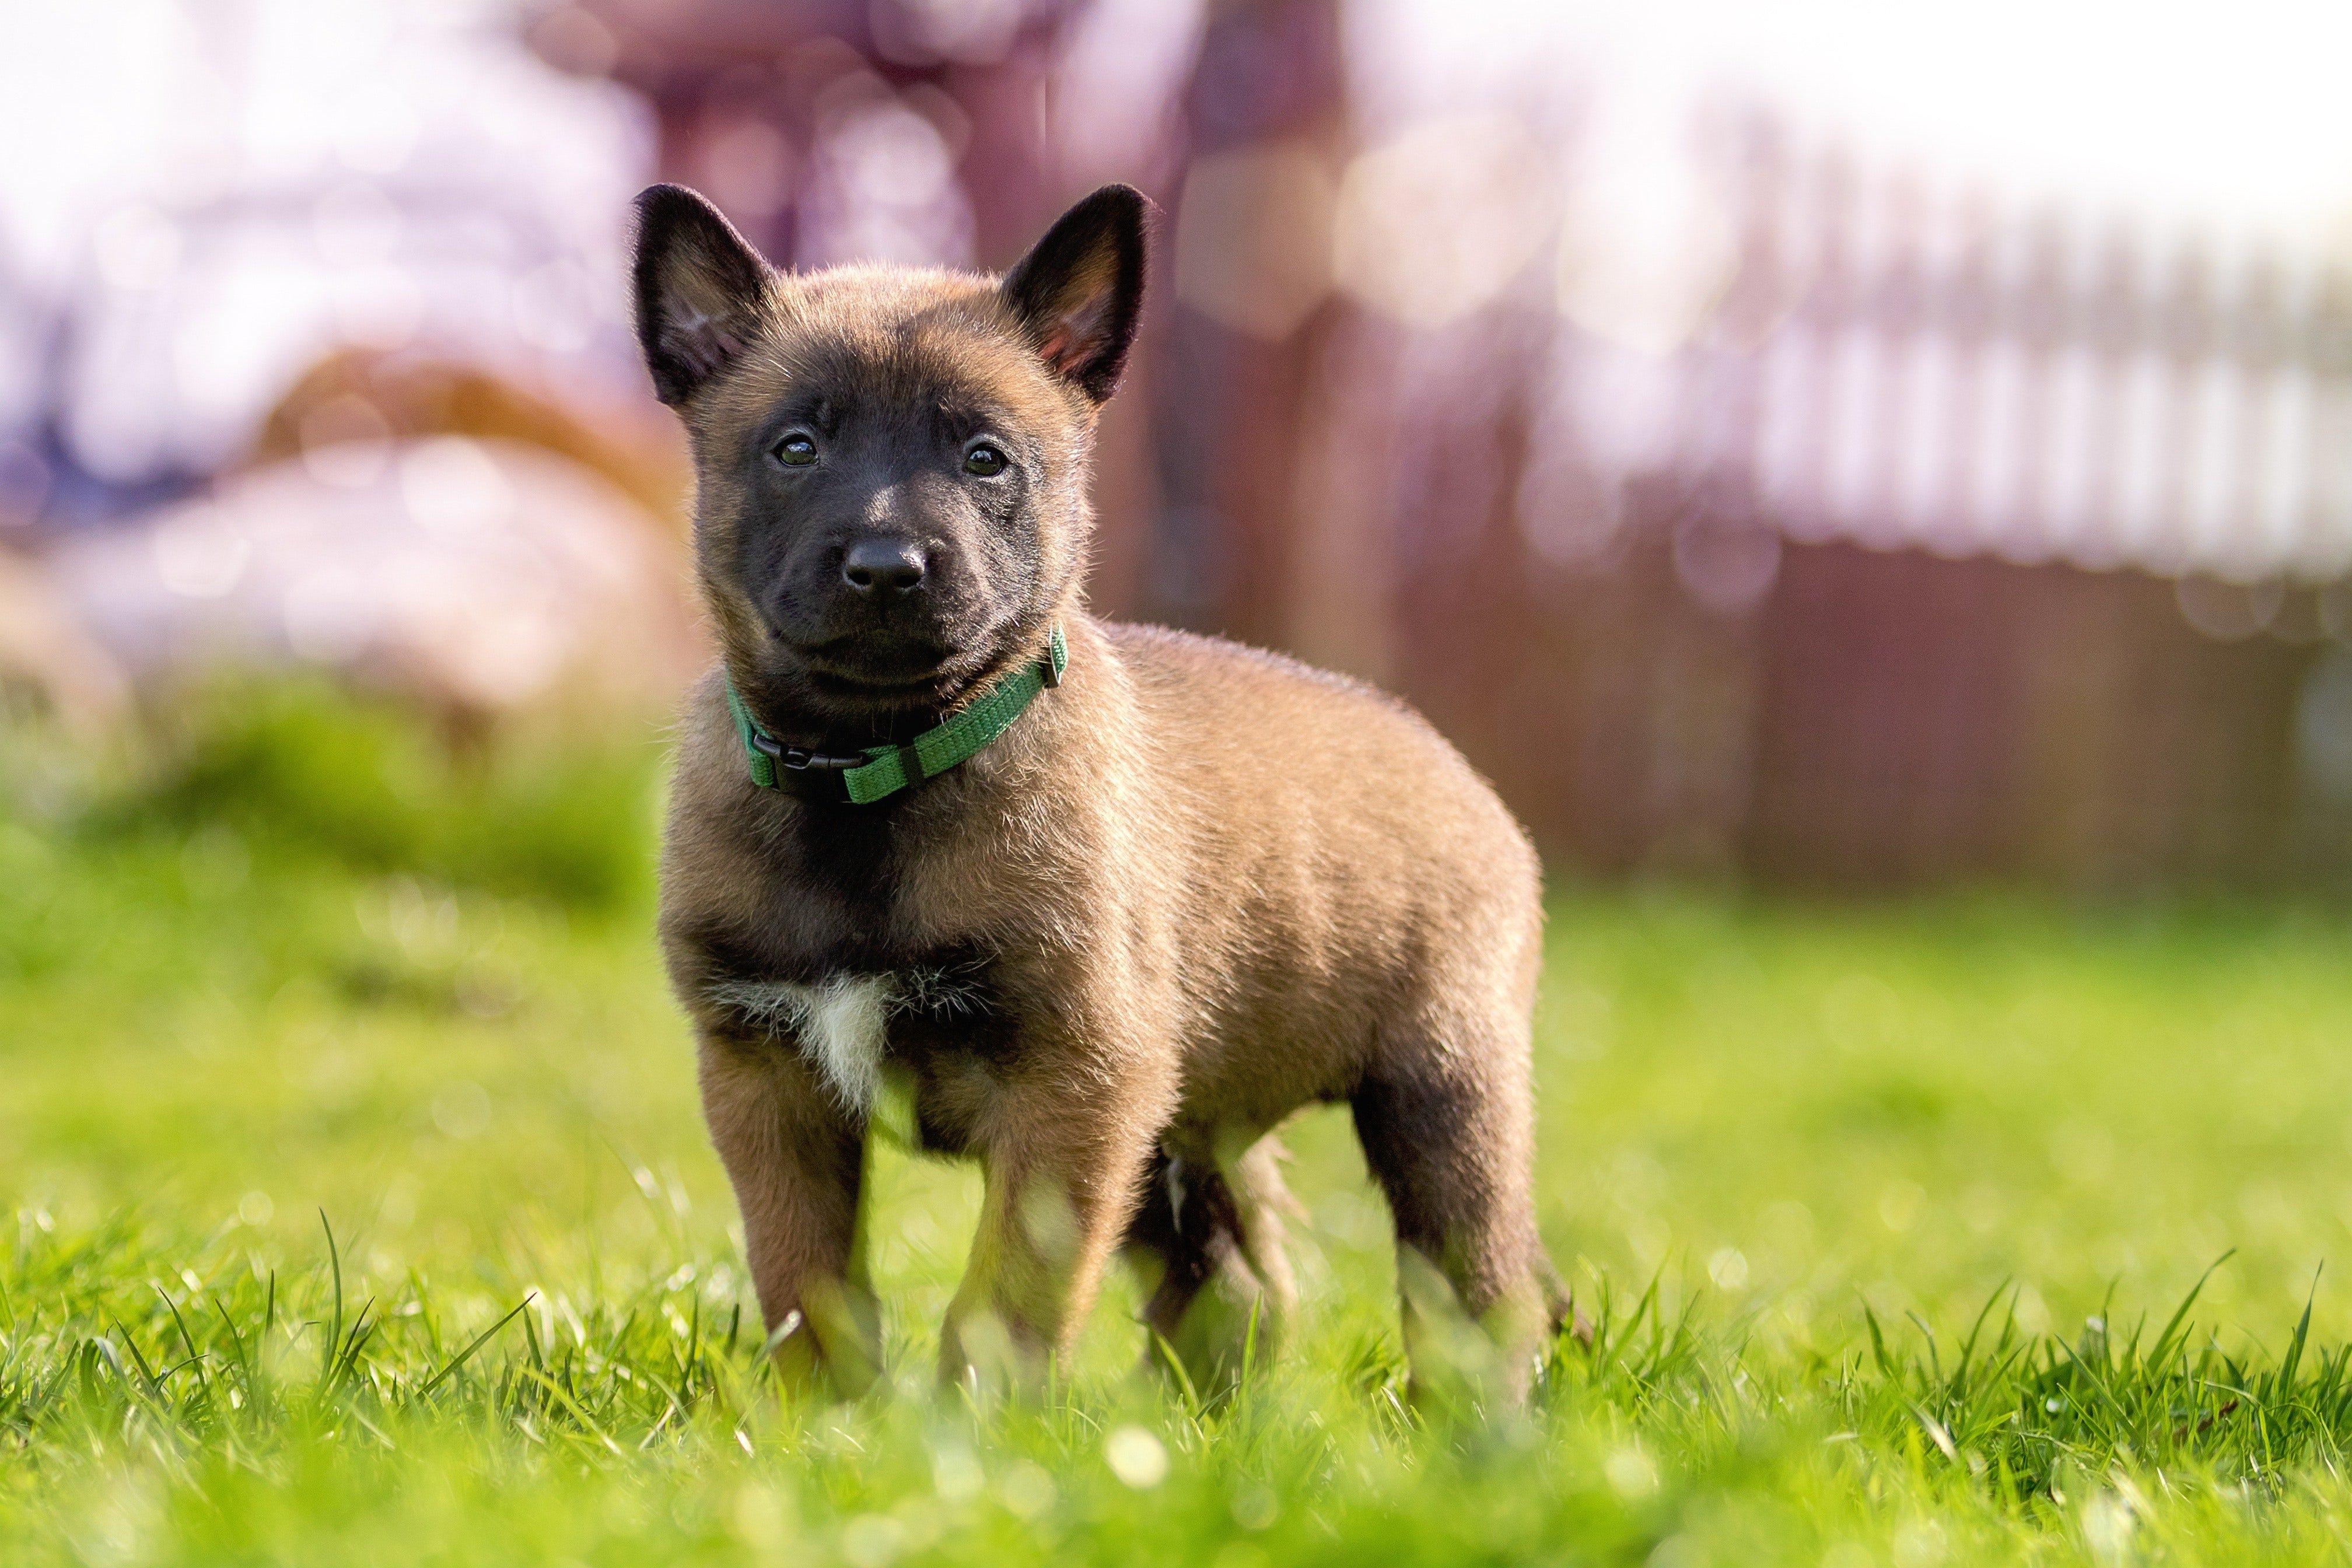 Fawn and Black Belgian Malinois Puppy on Green Grass · Free Stock